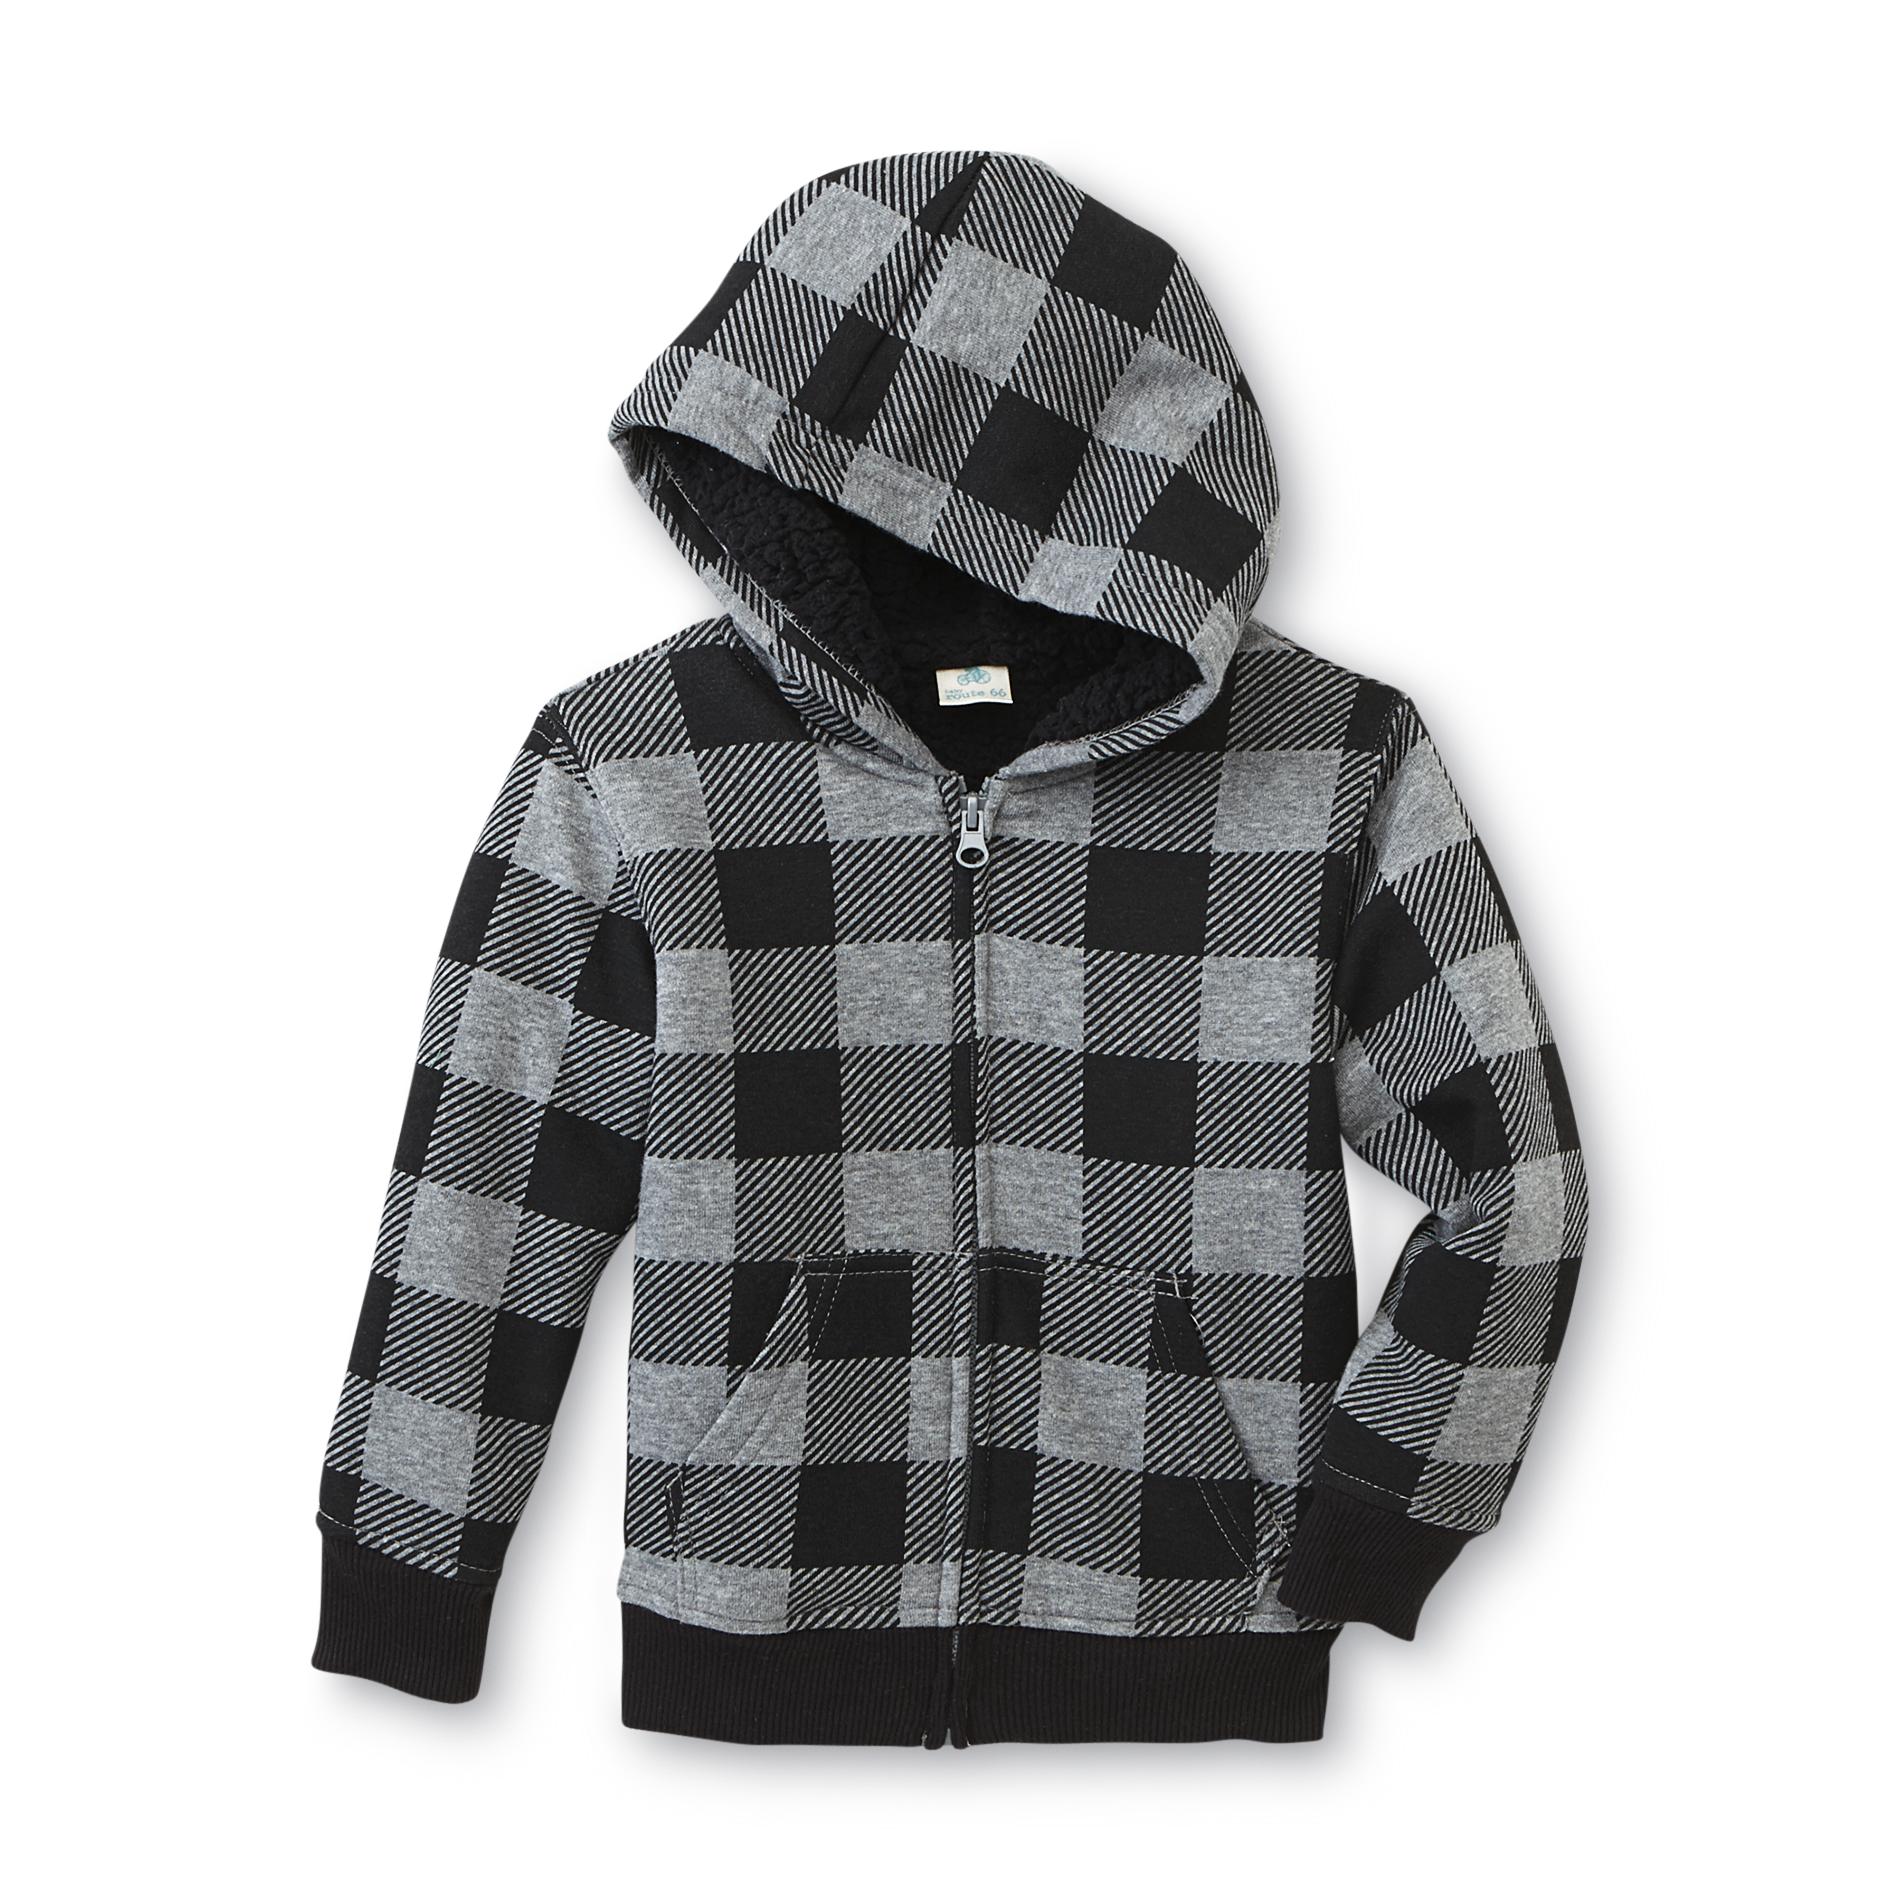 Route 66 Baby Toddler Boy's Hoodie Jacket - Checkered